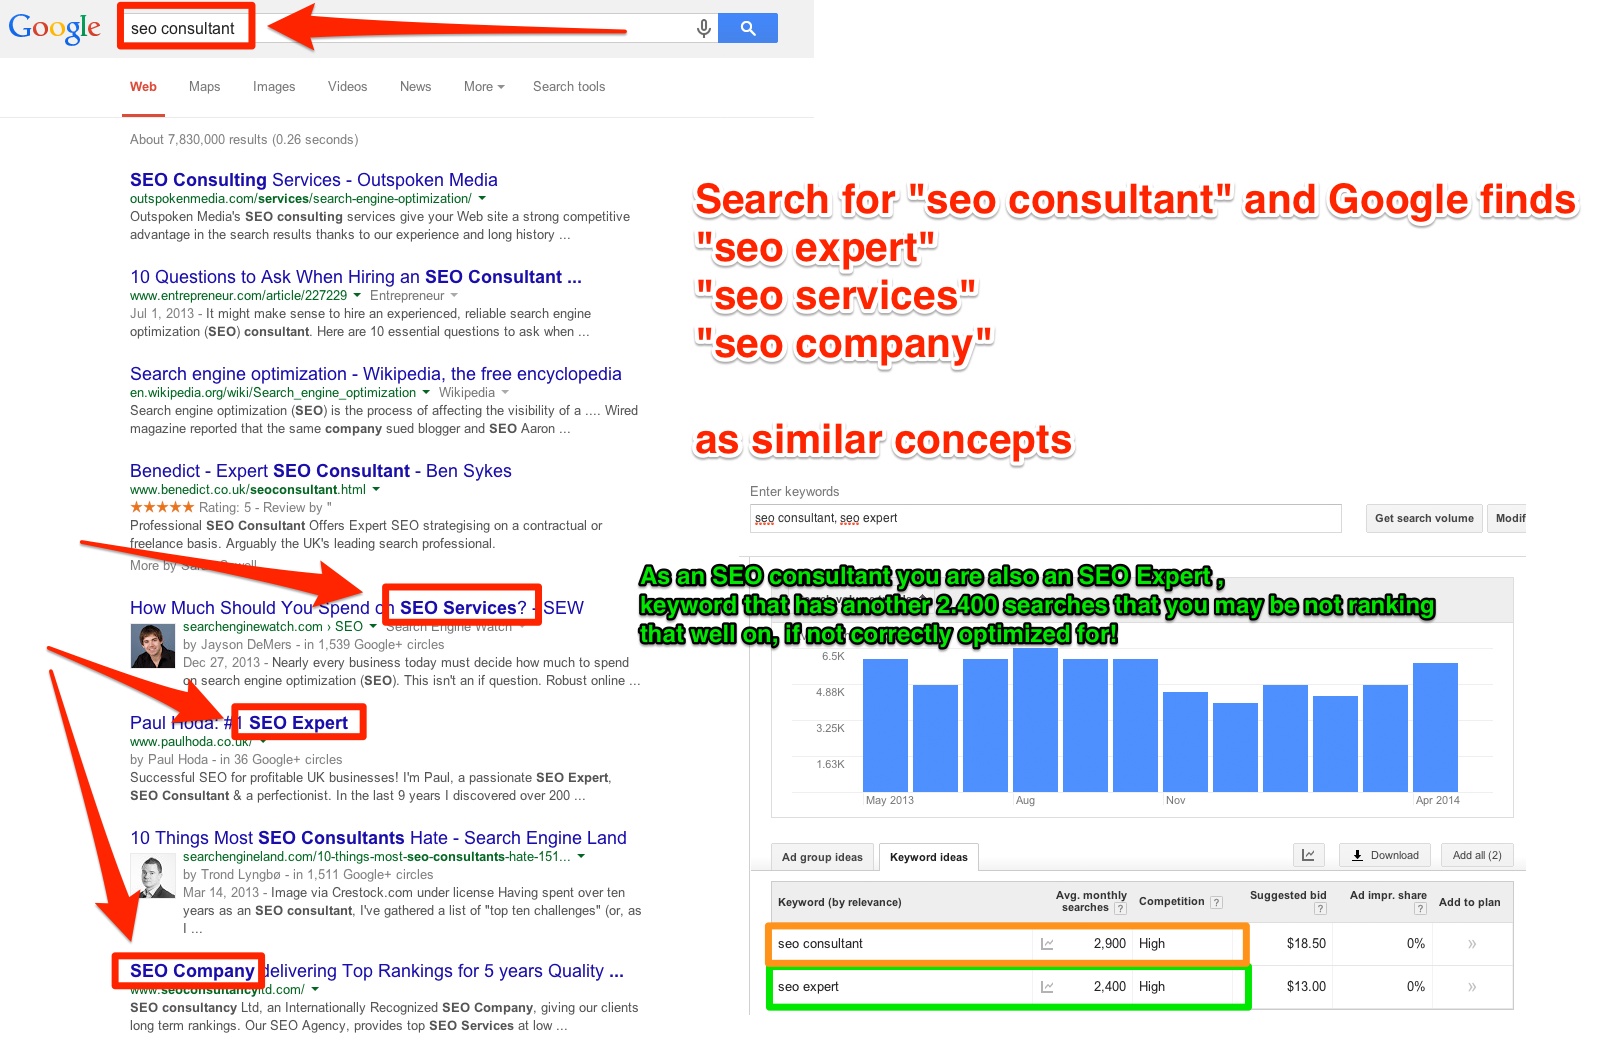 Seo Consultant ... Seo Expert Synonyms